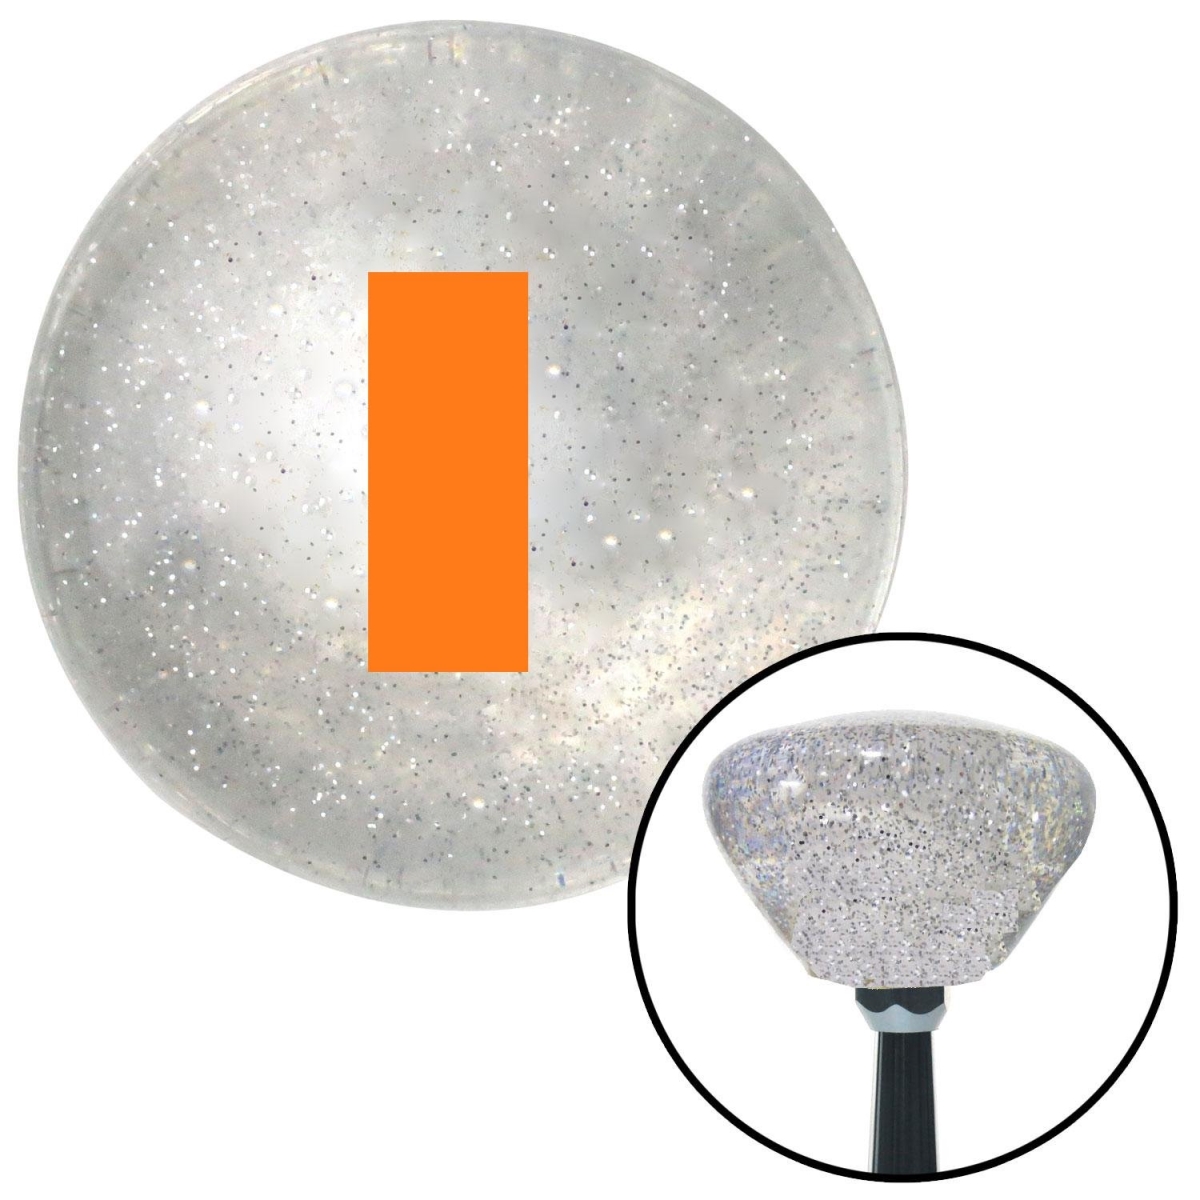 American Shifter 165166 Orange Officer 01 & 02 Clear Retro Metal Flake Shift Knob with M16 x 1.5 Insert -  American Shifter Company